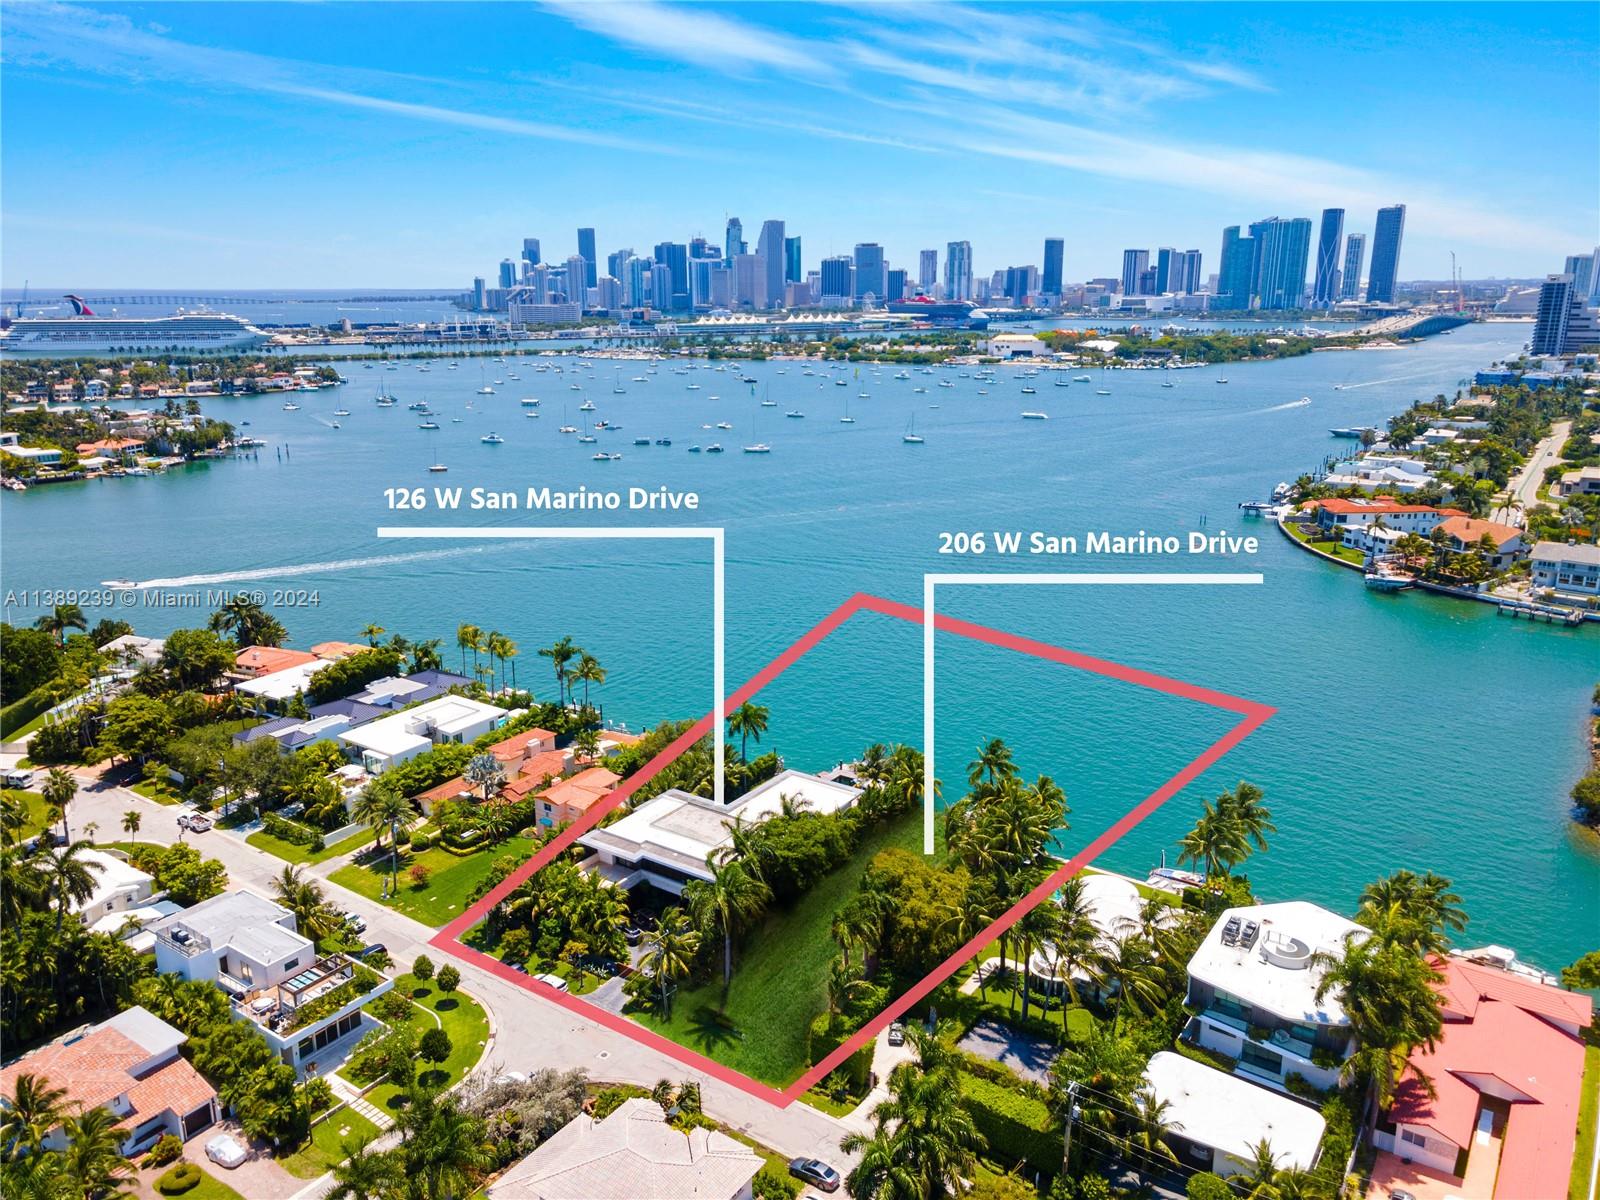 THE ULTIMATE POST CARD VIEW OF DOWNTOWN MIAMI SKYLINE ON THE BAY…EXPAND YOUR COMPOUND WITH THIS TROPICAL MODERN WATERFRONT ESTATE + ADJACENT LOT ON THE BEST LOCATION OF SAN MARINO ISLAND! Stunning Two-Story Waterfront Residence w/ 12,889 Adj Gross SF on 2 AND A HALF LOTS w/ 26,250 SF w/ 150 FT of Waterfront. 10 Bedrooms + 9 Baths + 3 Powder Rooms + Media Room + Office + Family Room. Open Floorplan with 10 FT Telescopic Doors by Fleetwood providing Seamless Indoor/Outdoor Living. Blonde Oak Chef’s Eat-in Kitchen with Stainless Steel Miele Appliances, Breakfast Area + Family Room, Library, Wine Cellar & Bar. Spacious Primary Suite draped by Panoramic Sunsets & Views of Miami Skyline. Tropical Pool & Spa with Modern Gazebo + Summer Kitchen + Cabana Bath. Opportunity for 3 Vessel Dock + Lift.